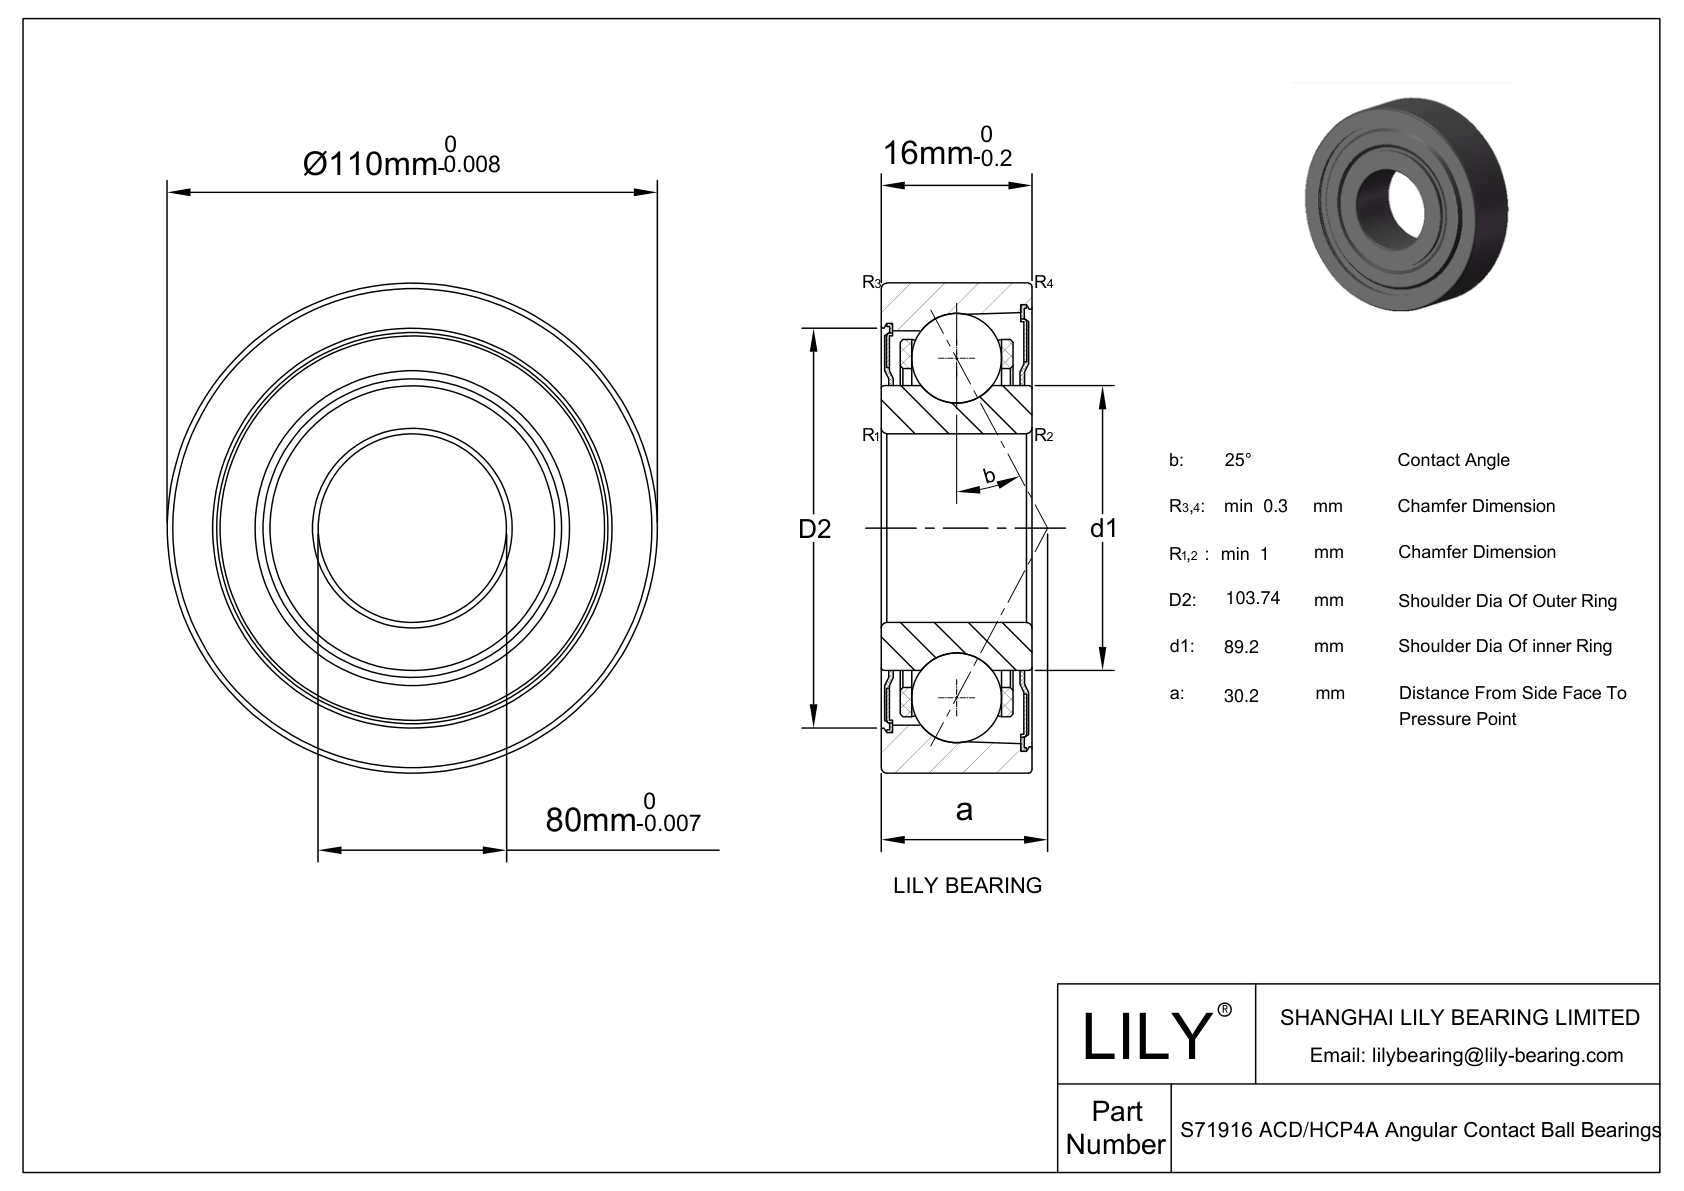 S71916 ACD/HCP4A Super Precision Angular Contact Ball Bearings cad drawing